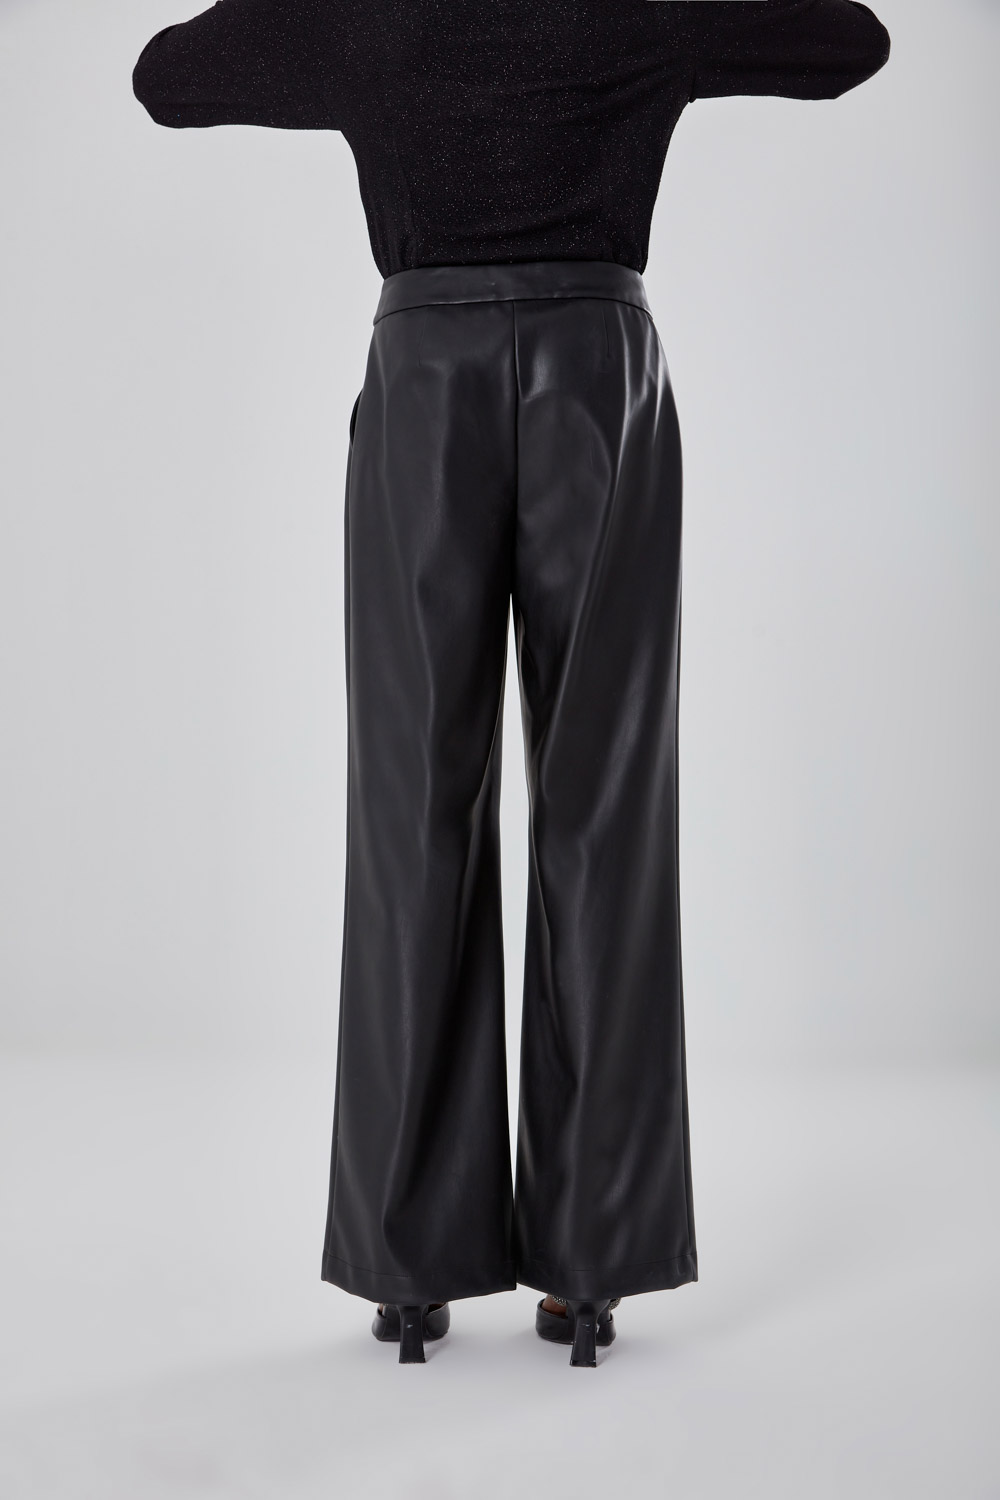 Leather Detailed Casual Black Pants